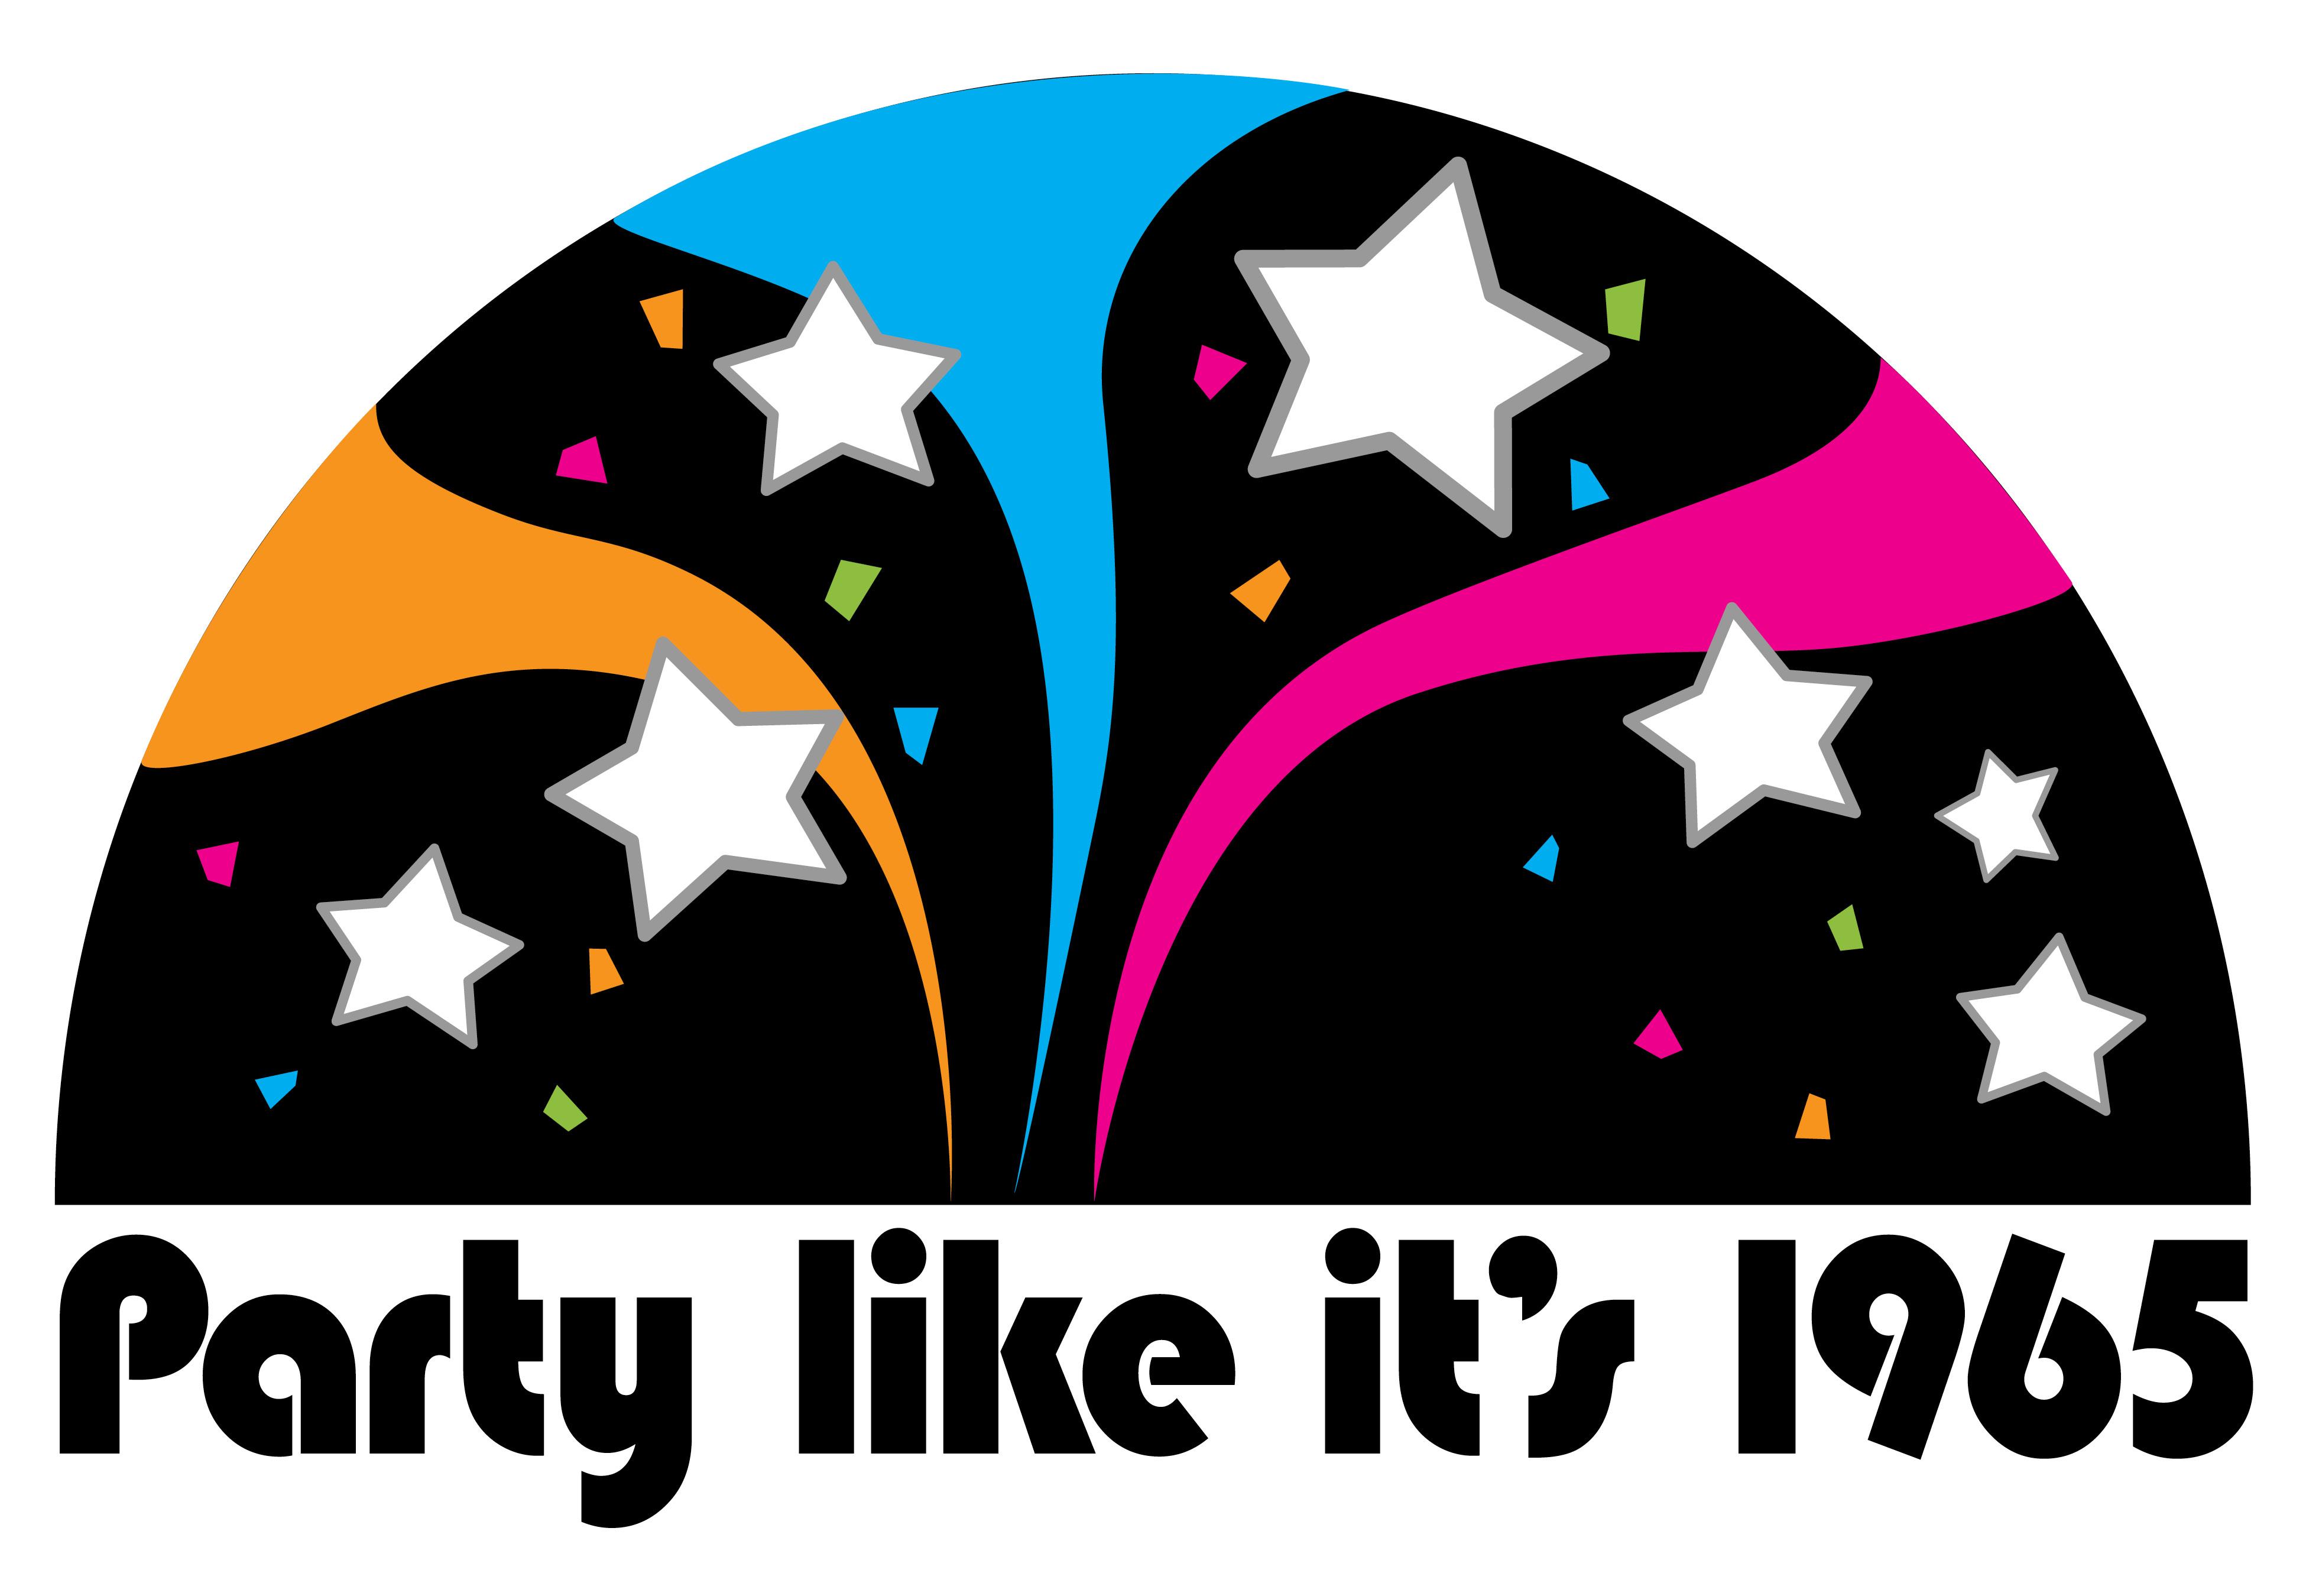 1965 Logo - Party like 1965 logo | The State Museum of Pennsylvania